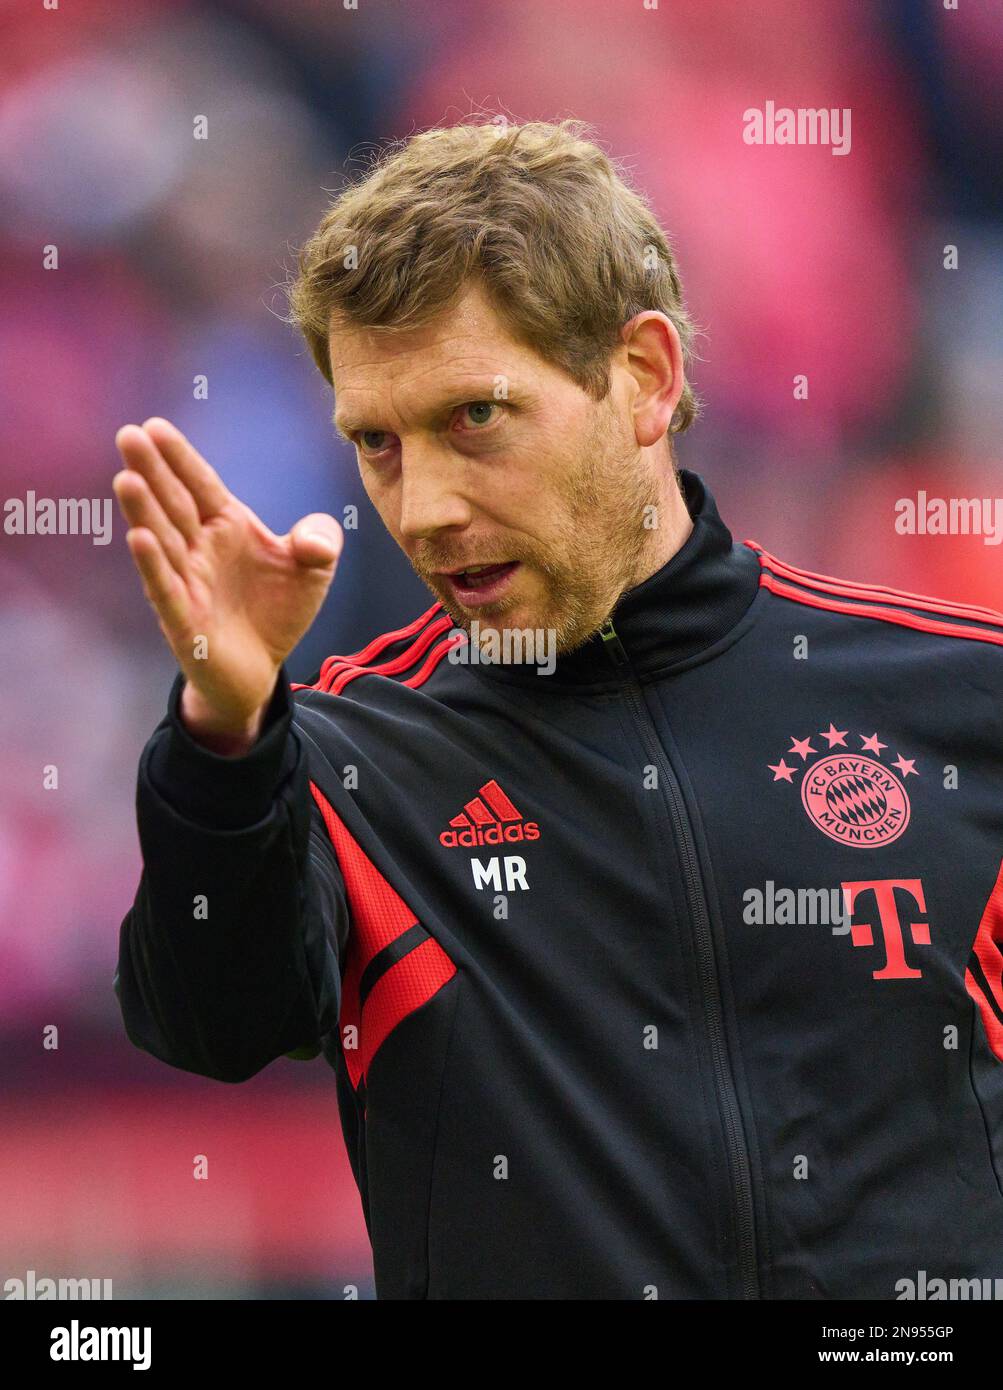 Michael Rechner follows Toni TAPALOVIC as goalkeeper coach, Torwarttrainer FCB , in the match FC BAYERN MUENCHEN - VFL BOCHUM 3-0 1.German Football League on Feb 11, 2023 in Munich, Germany. Season 2022/2023, matchday 20, 1.Bundesliga, FCB, München, 20.Spieltag. © Peter Schatz / Alamy Live News    - DFL REGULATIONS PROHIBIT ANY USE OF PHOTOGRAPHS as IMAGE SEQUENCES and/or QUASI-VIDEO - Credit: Peter Schatz/Alamy Live News Stock Photo